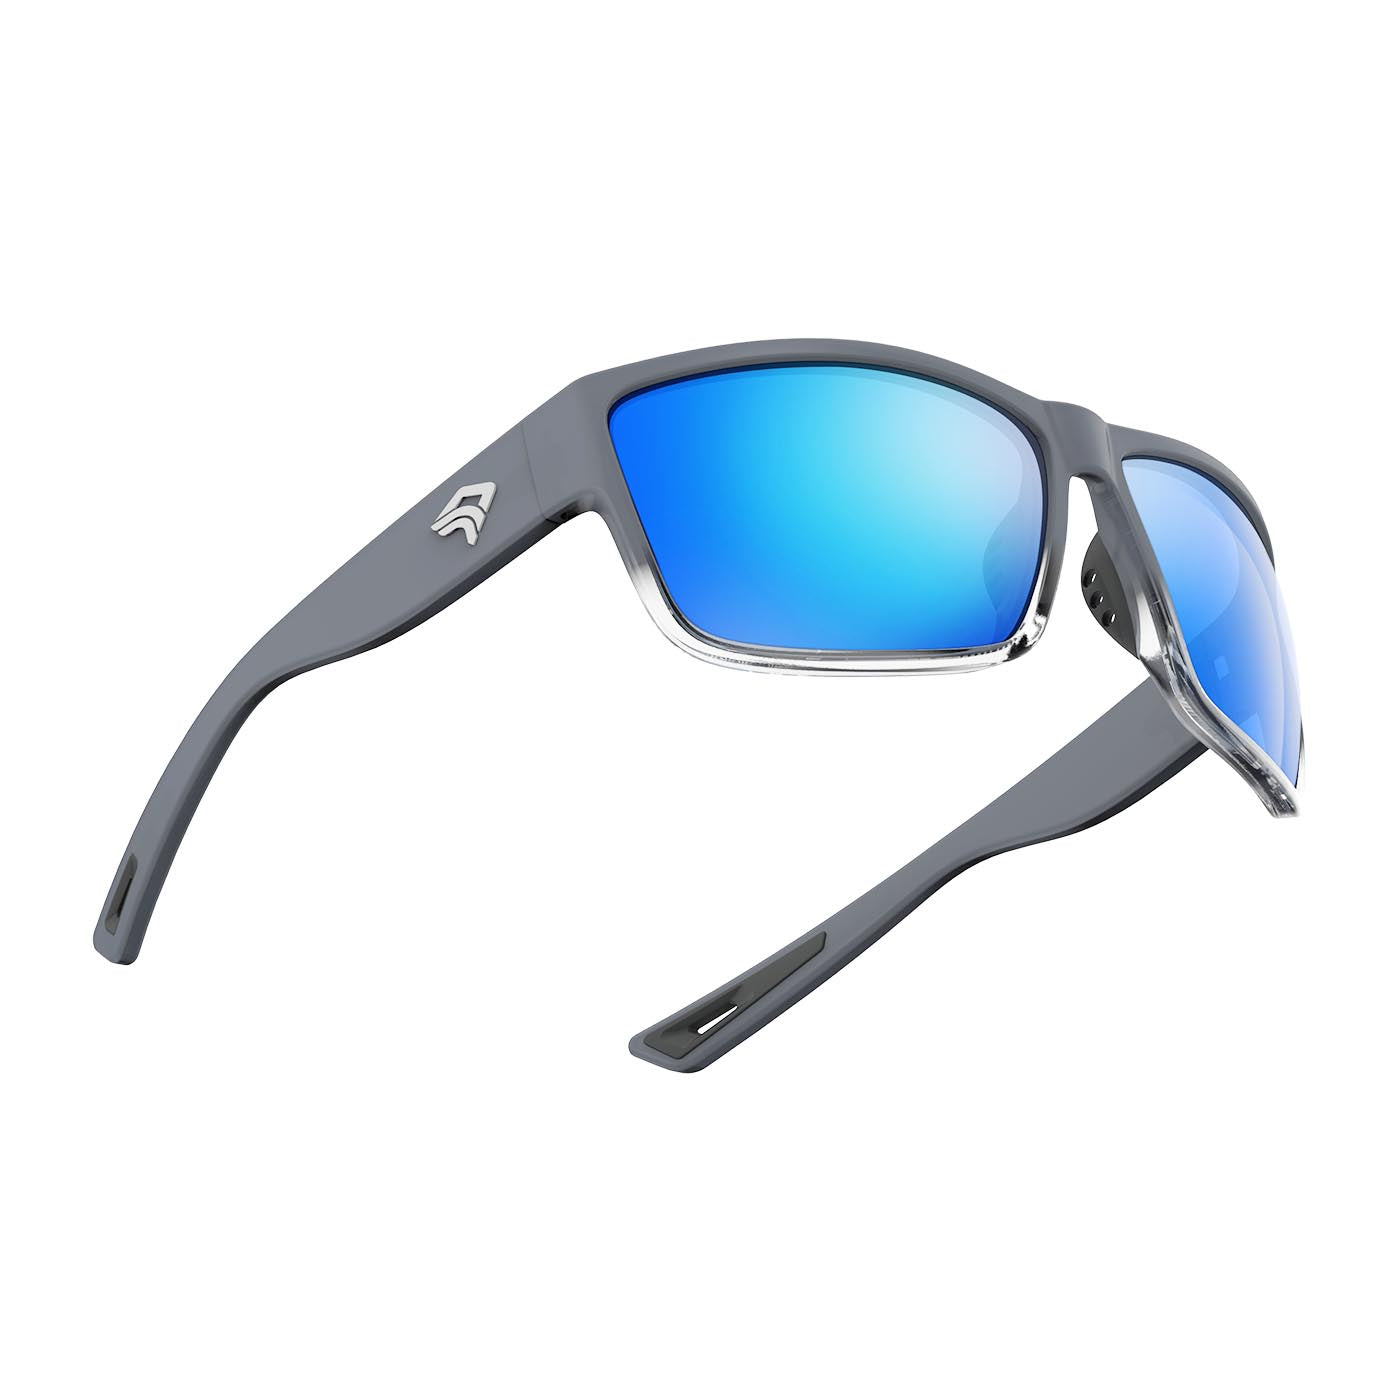 Pure Polarized Sports Sunglasses - Transparent - and Matte Grey Frame Cycling, Fishing Flexible Half Men with Running, Ideal Lifetime Warranty Women To for for and - and Golf, Adjustable Ideal 